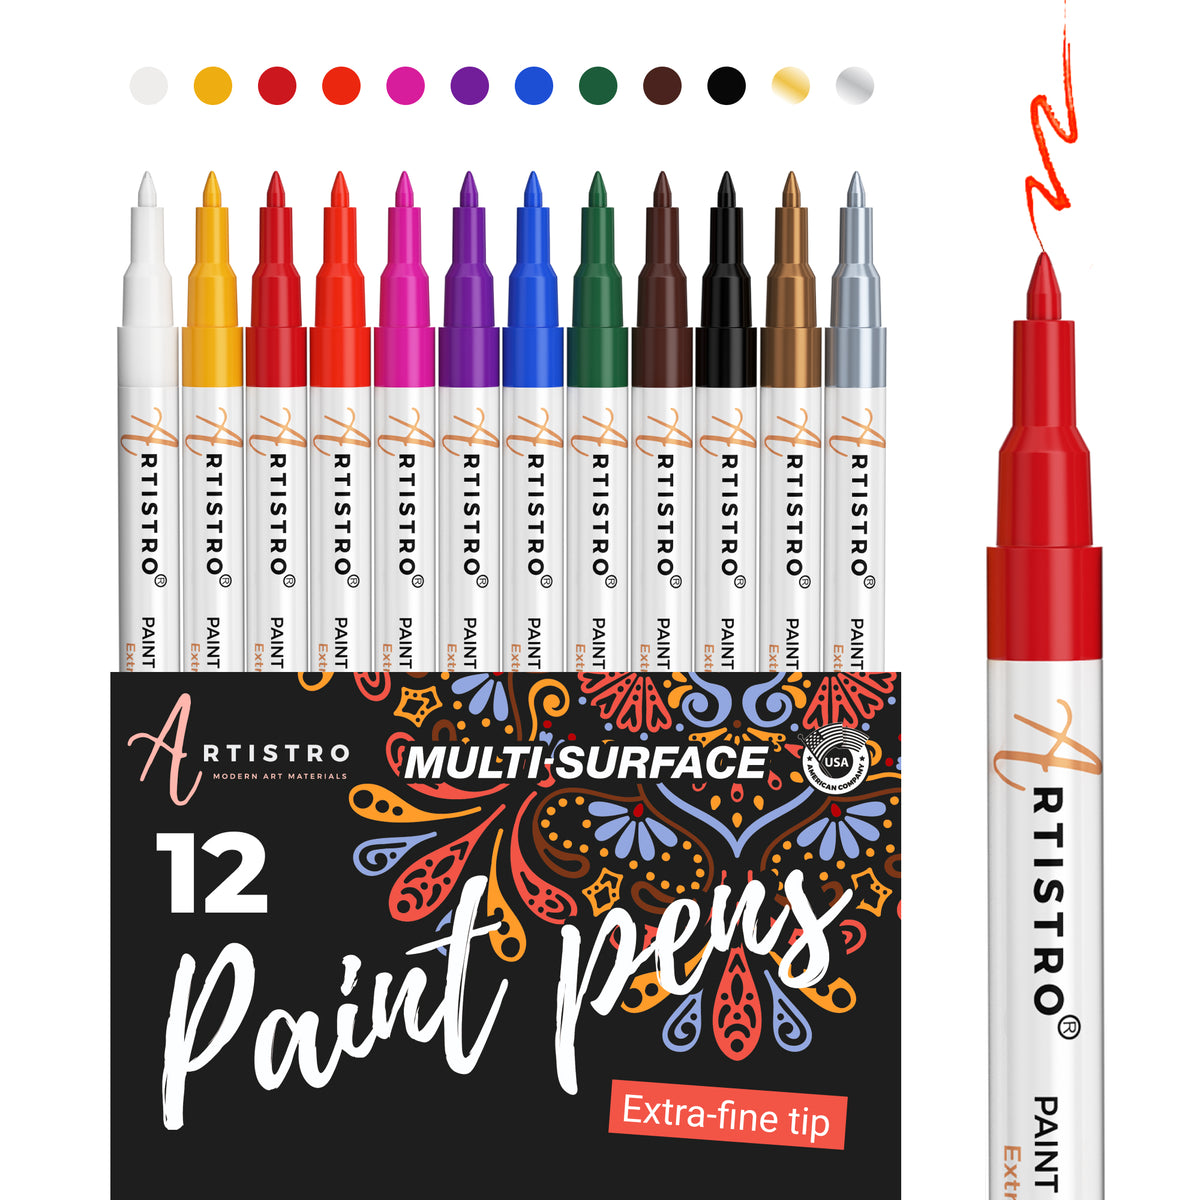 product 12 Extra Fine Tip paint pens